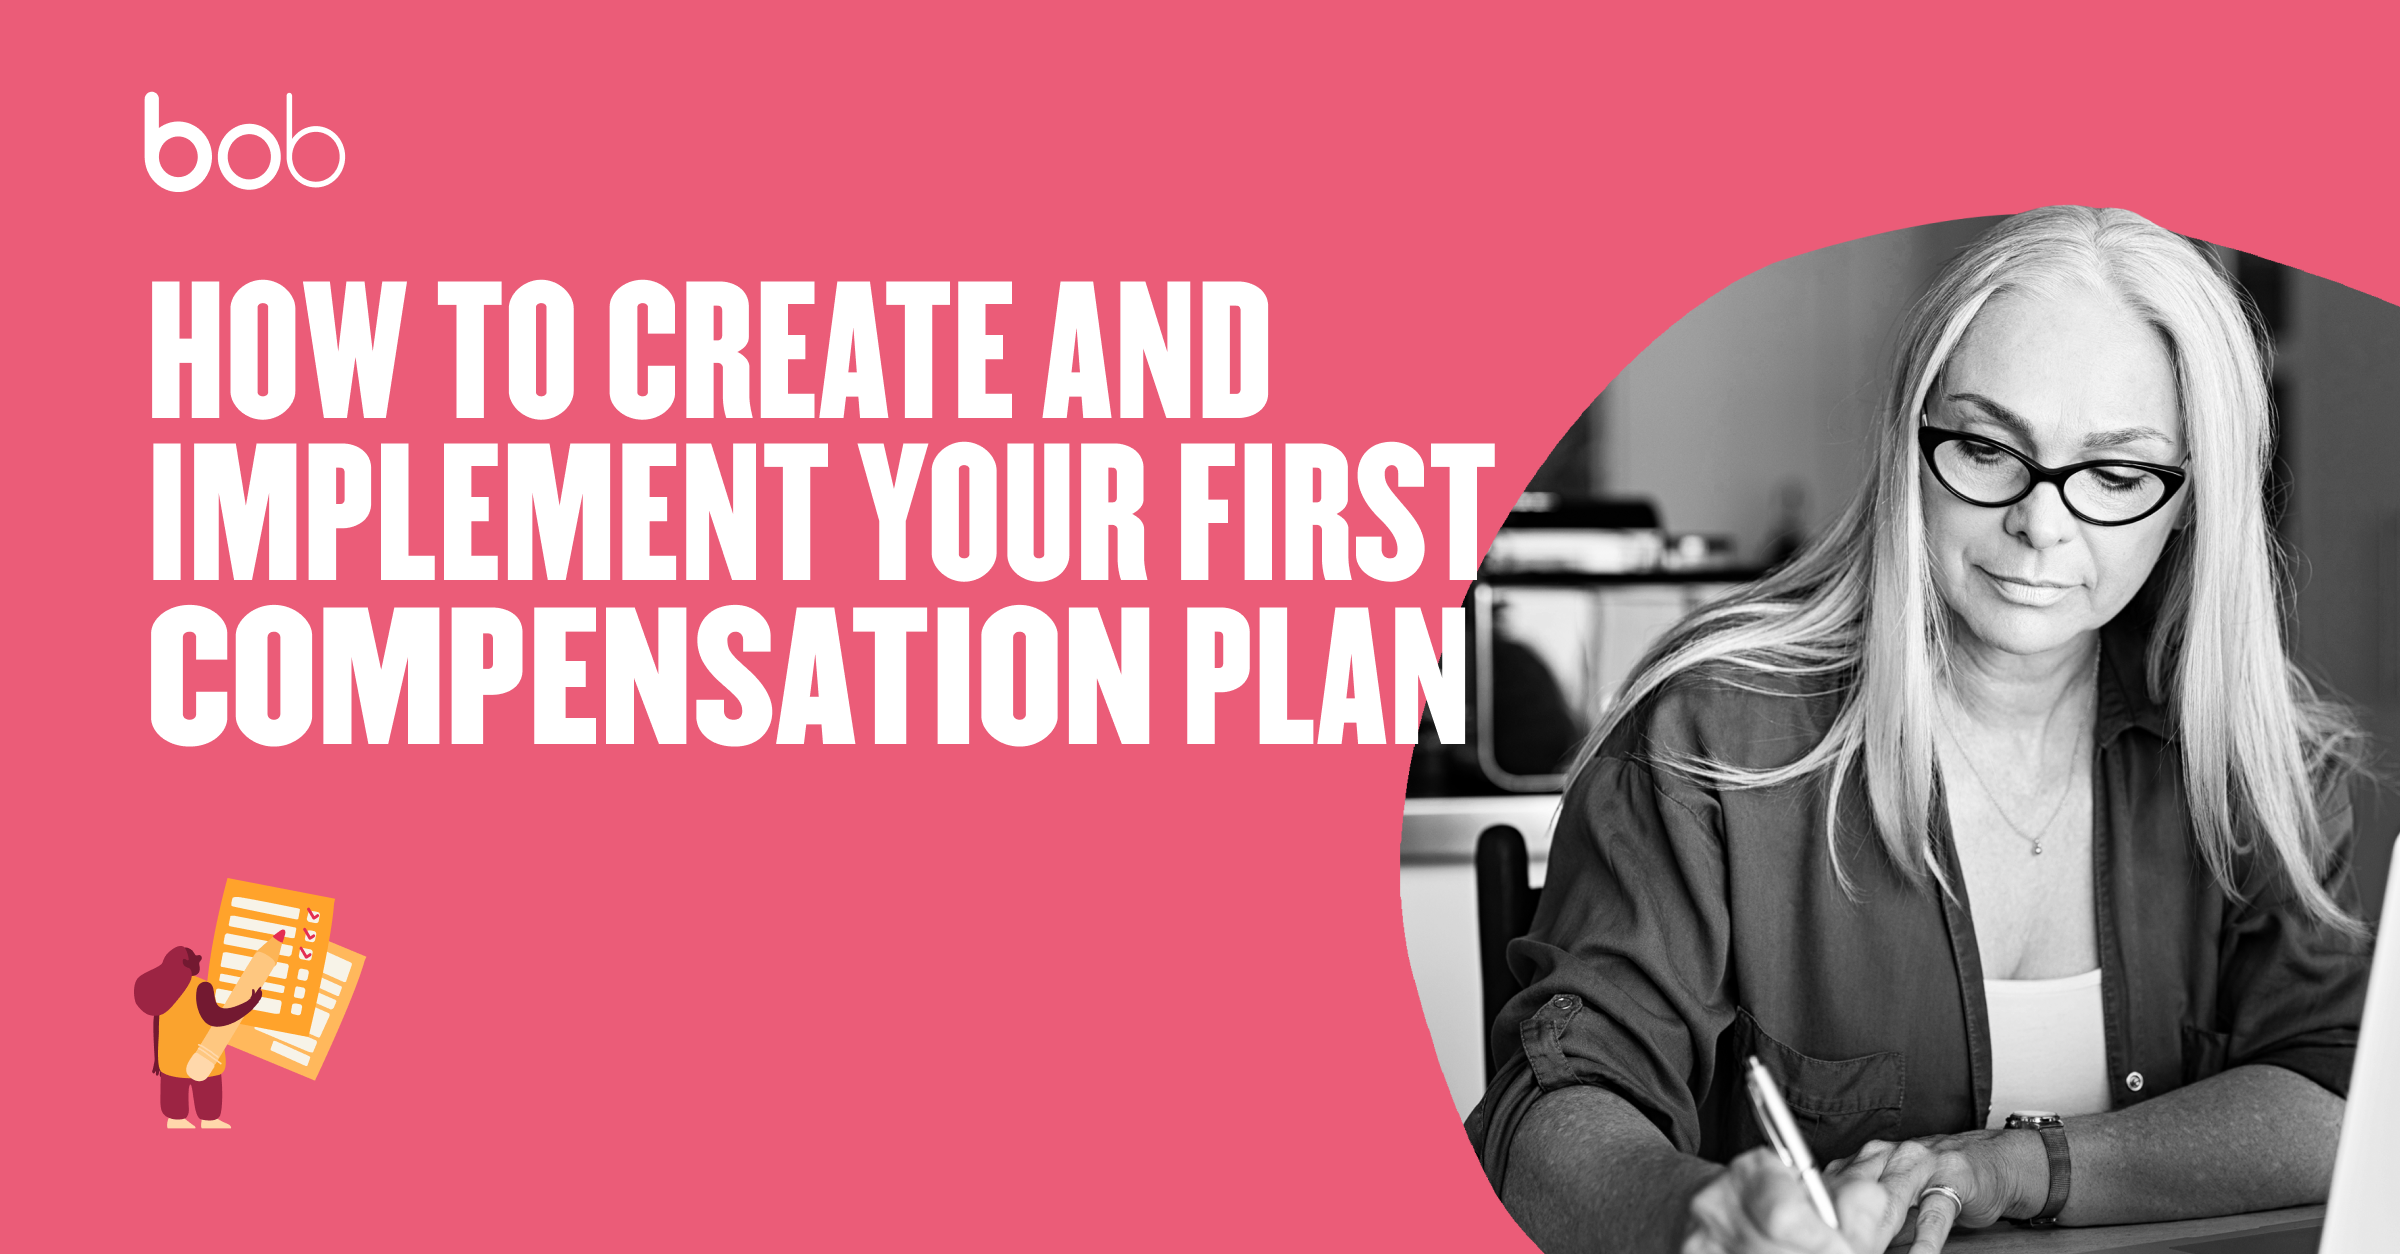 How to create a compensation plan and implement it